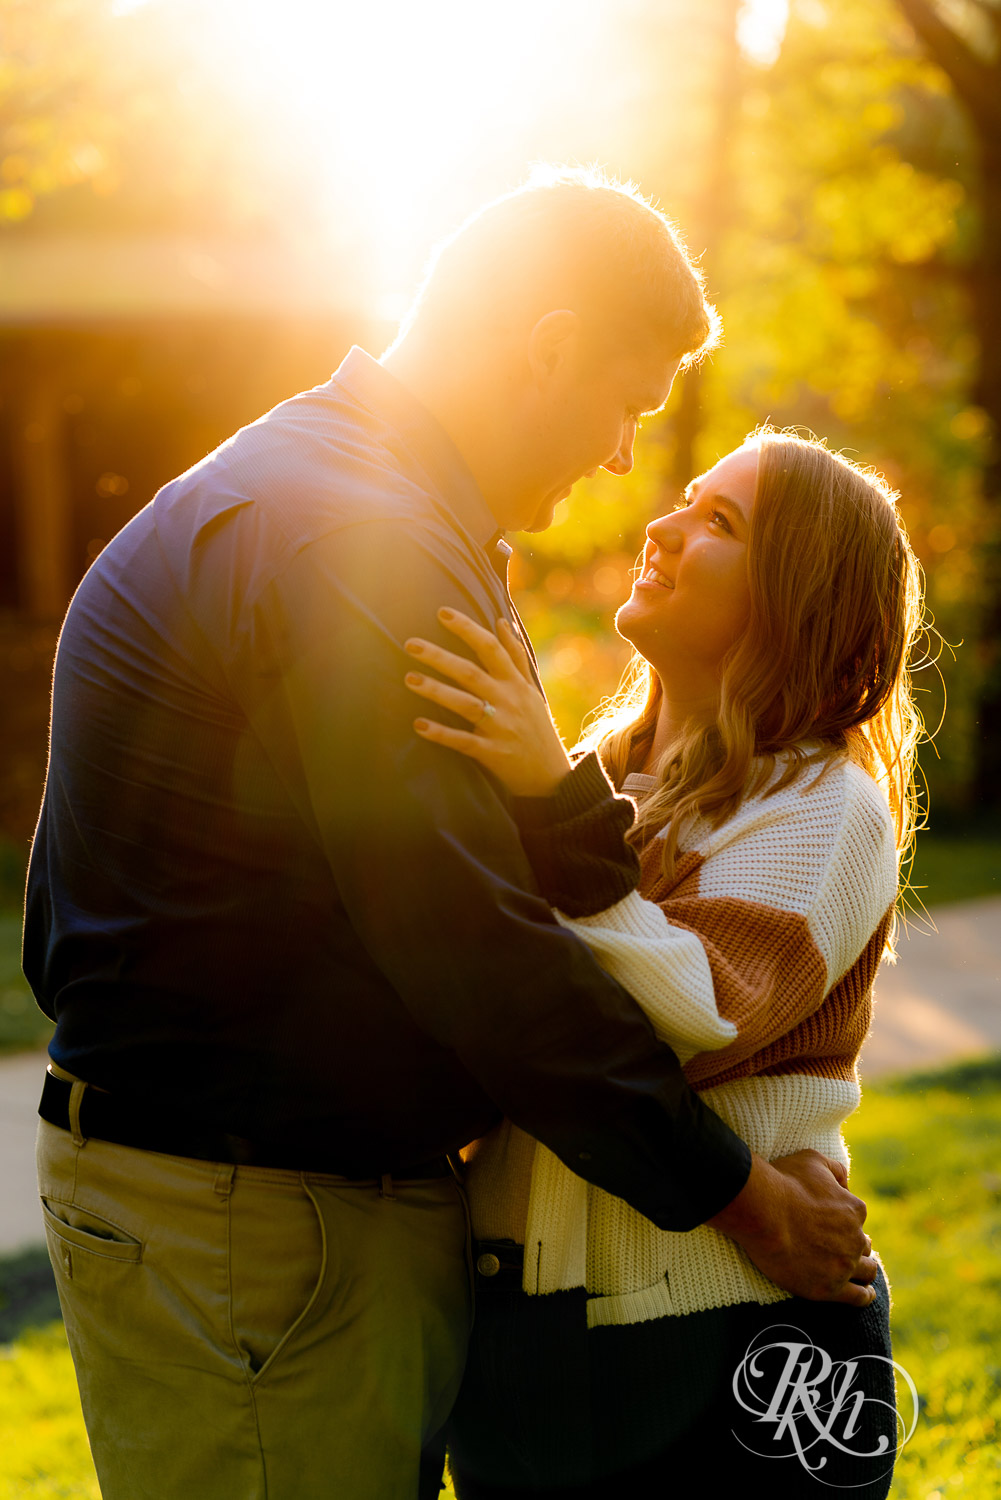 Man and woman smiling during sunset engagement photo session at Lebanon Hills Regional Park in Eagan, Minnesota.